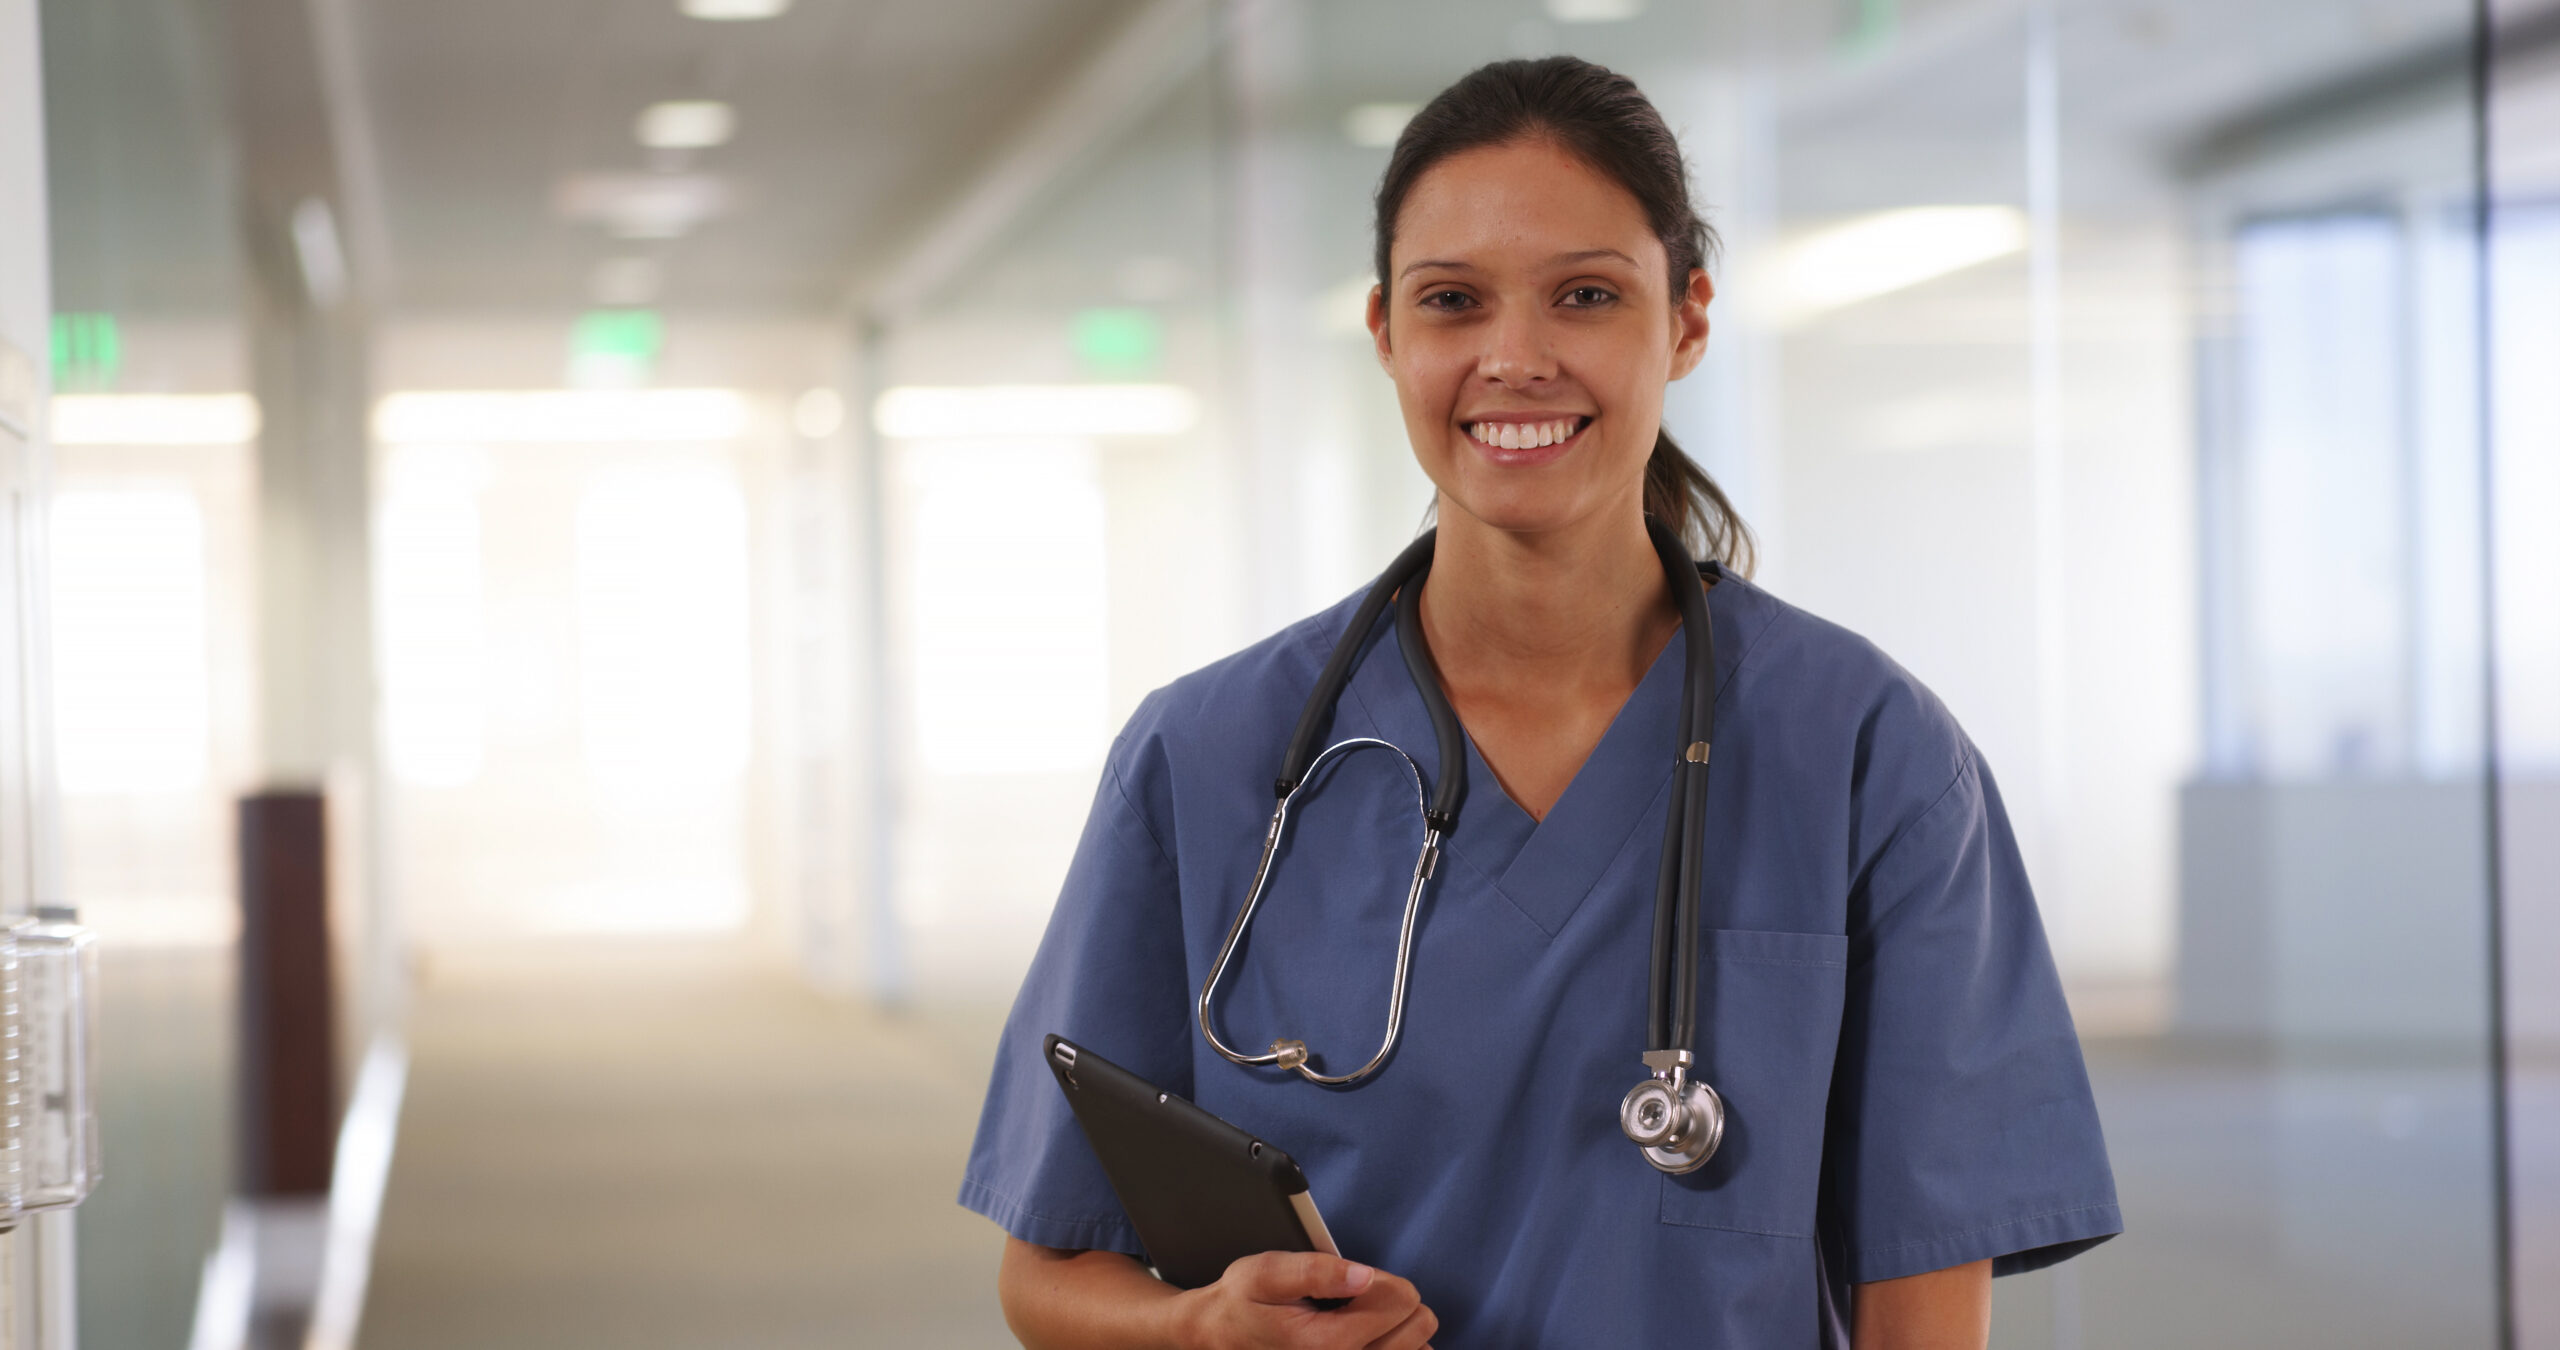 Happy millennial woman nurse or doctor smiling at camera in hallway